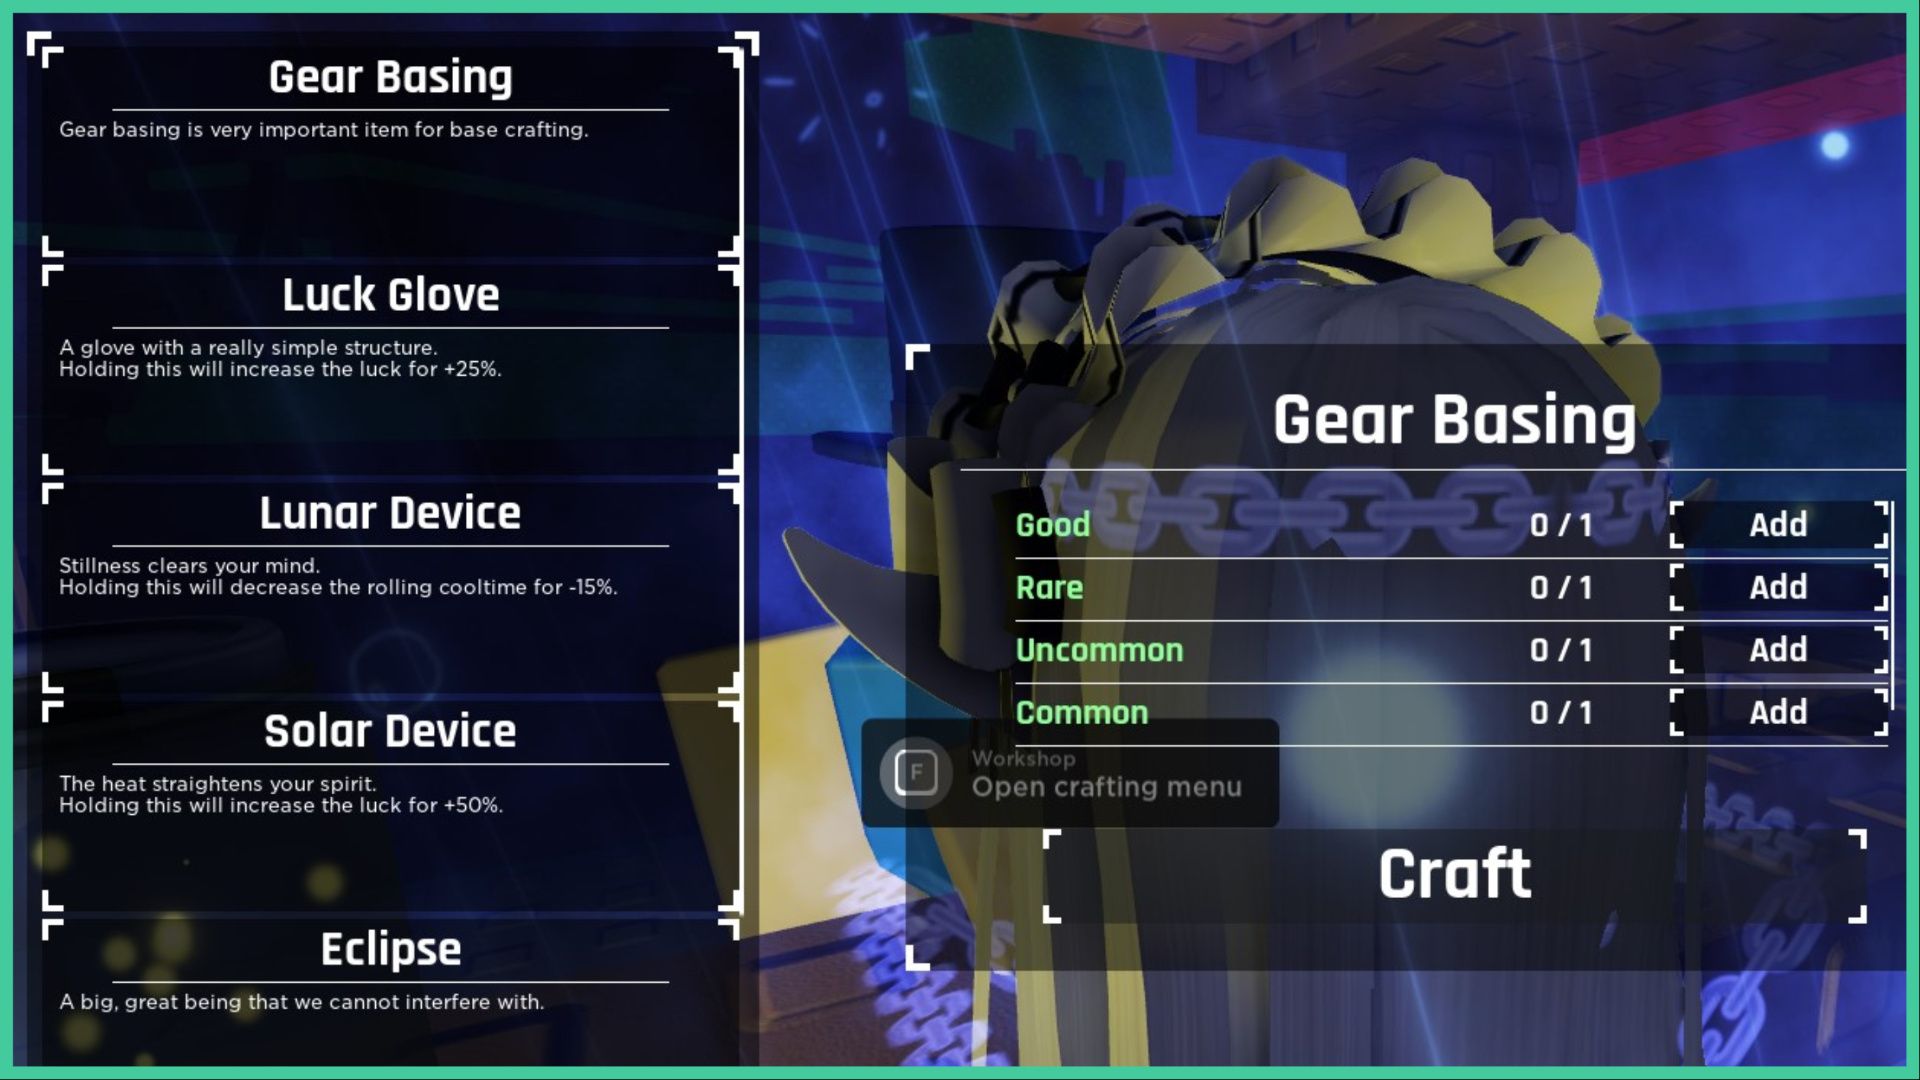 feature image for our sol's rng crafting guide, the image features a screenshot of the crafting page, with the recipe for a gear basing item and the list of craftable items to the left as a roblox player stands at a counter